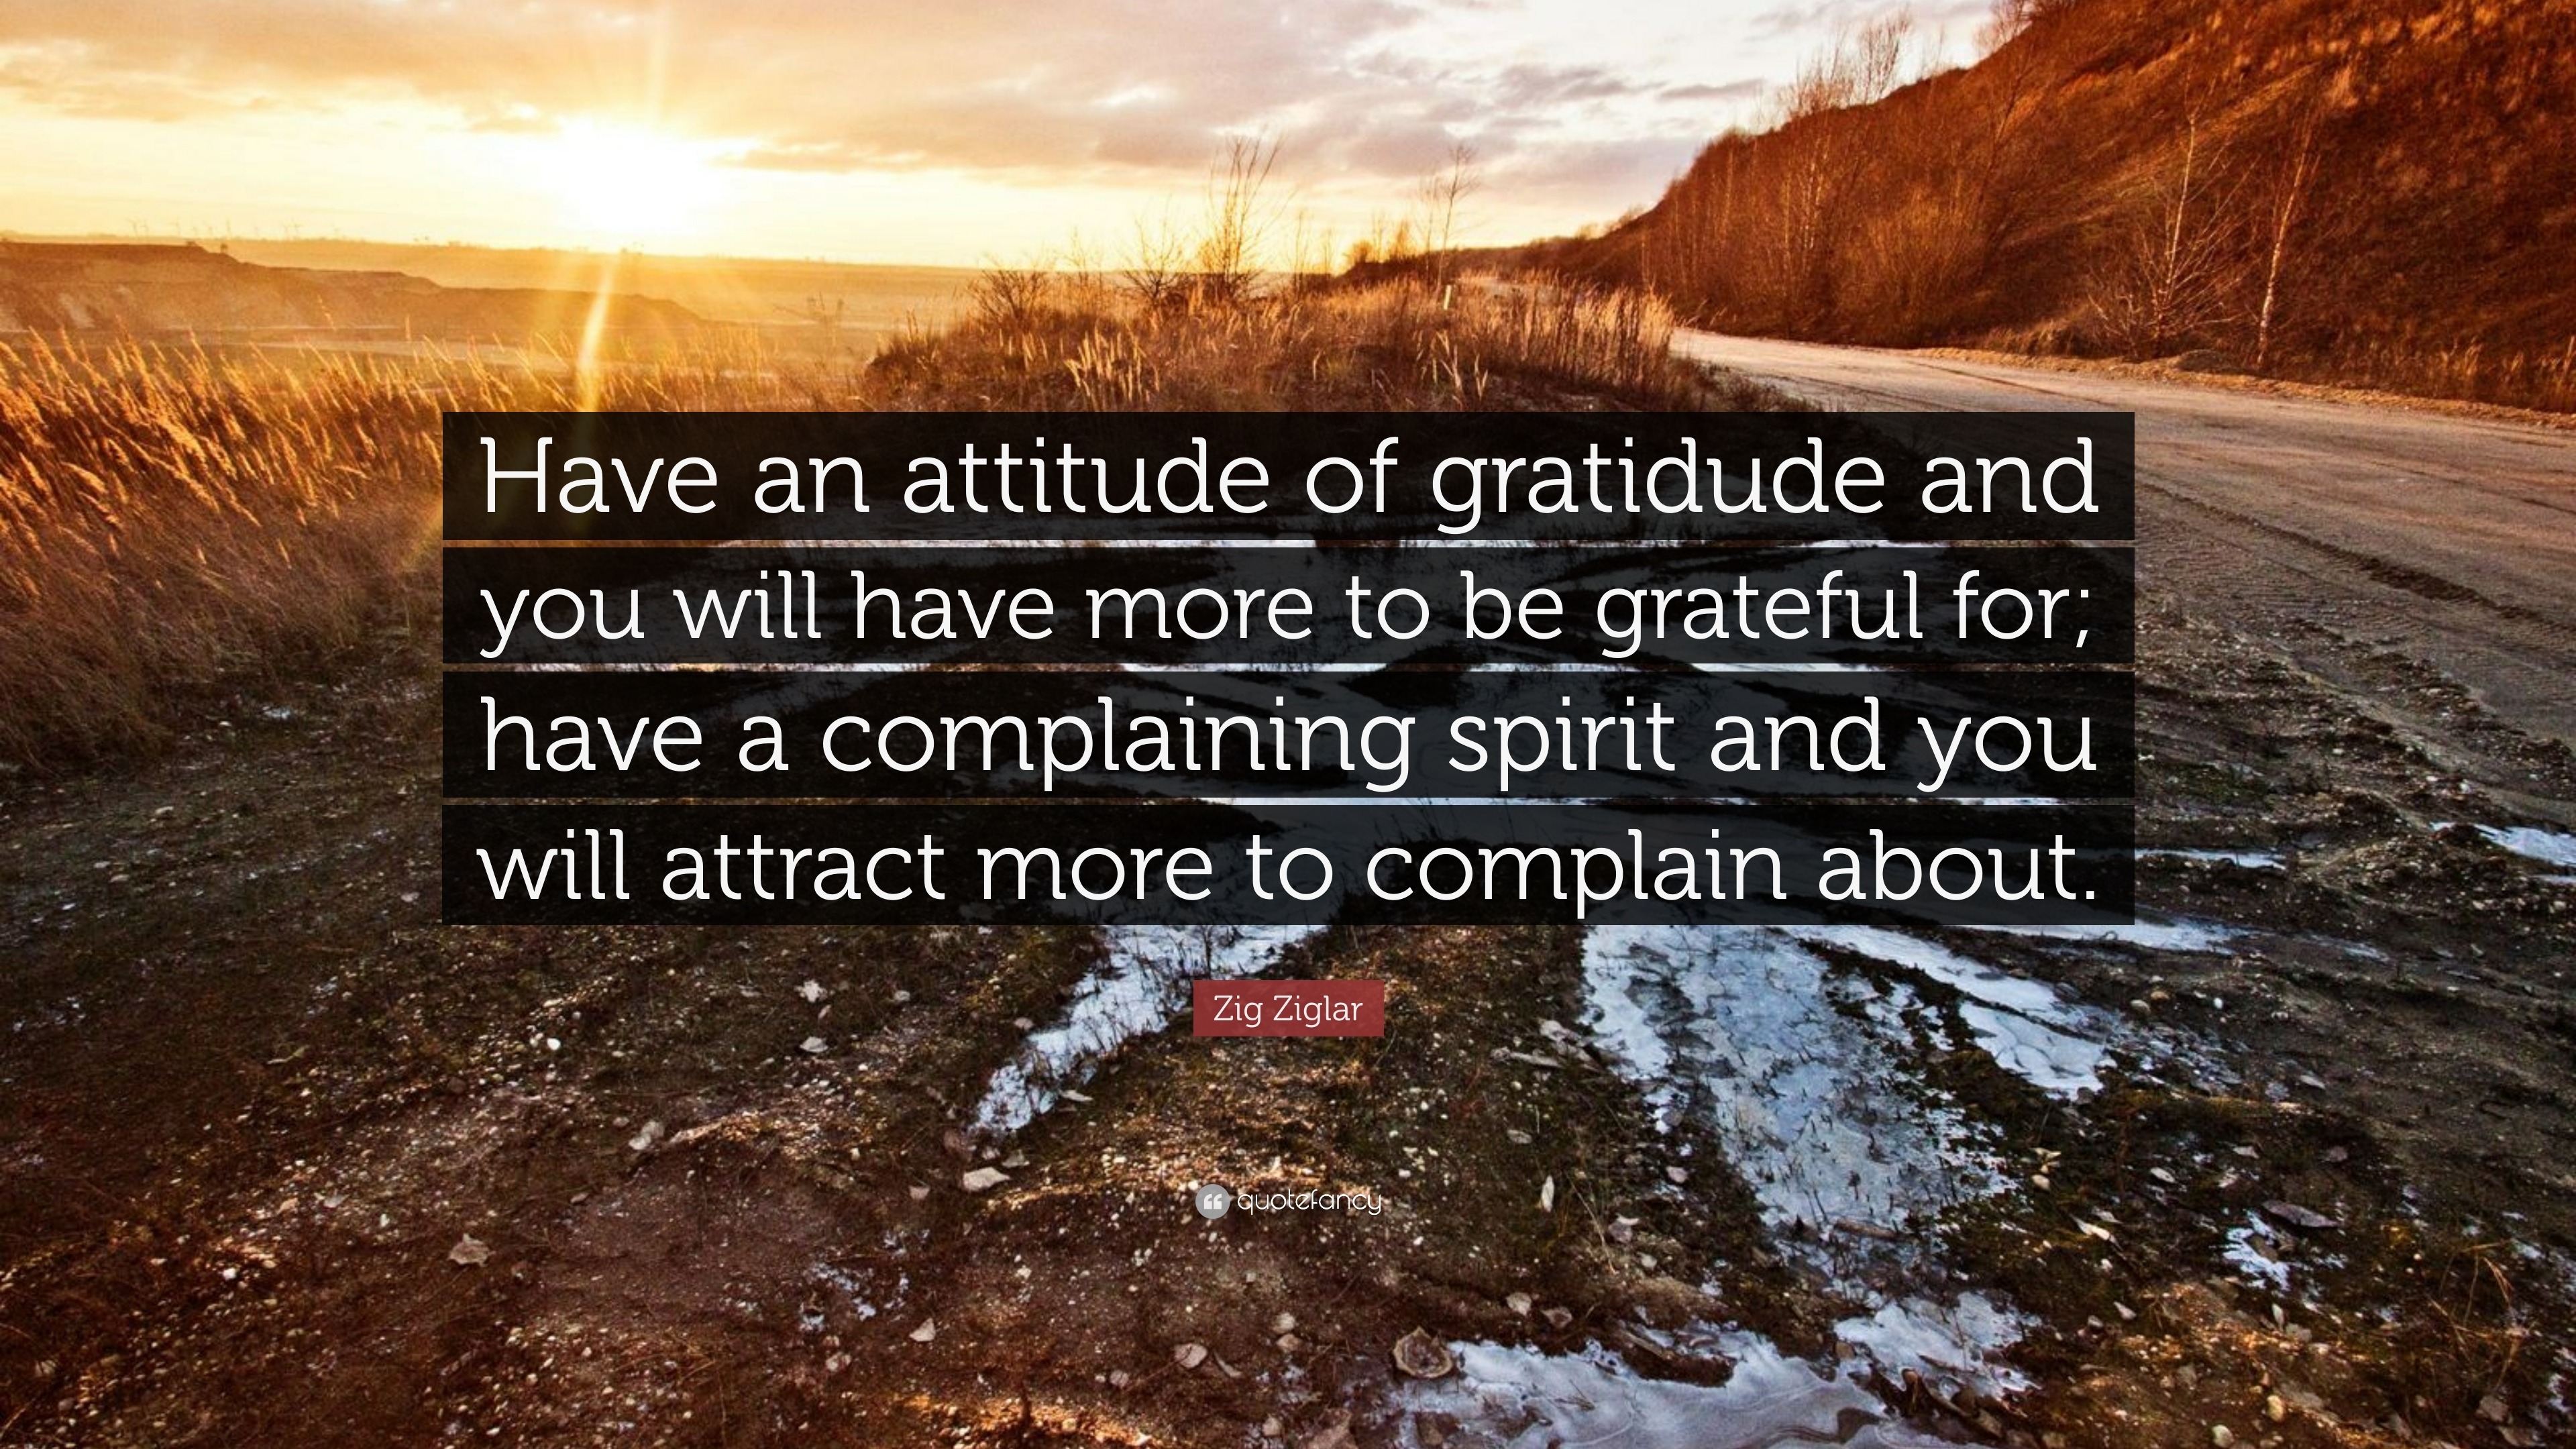 121932 Zig Ziglar Quote Have an attitude of gratidude and you will have